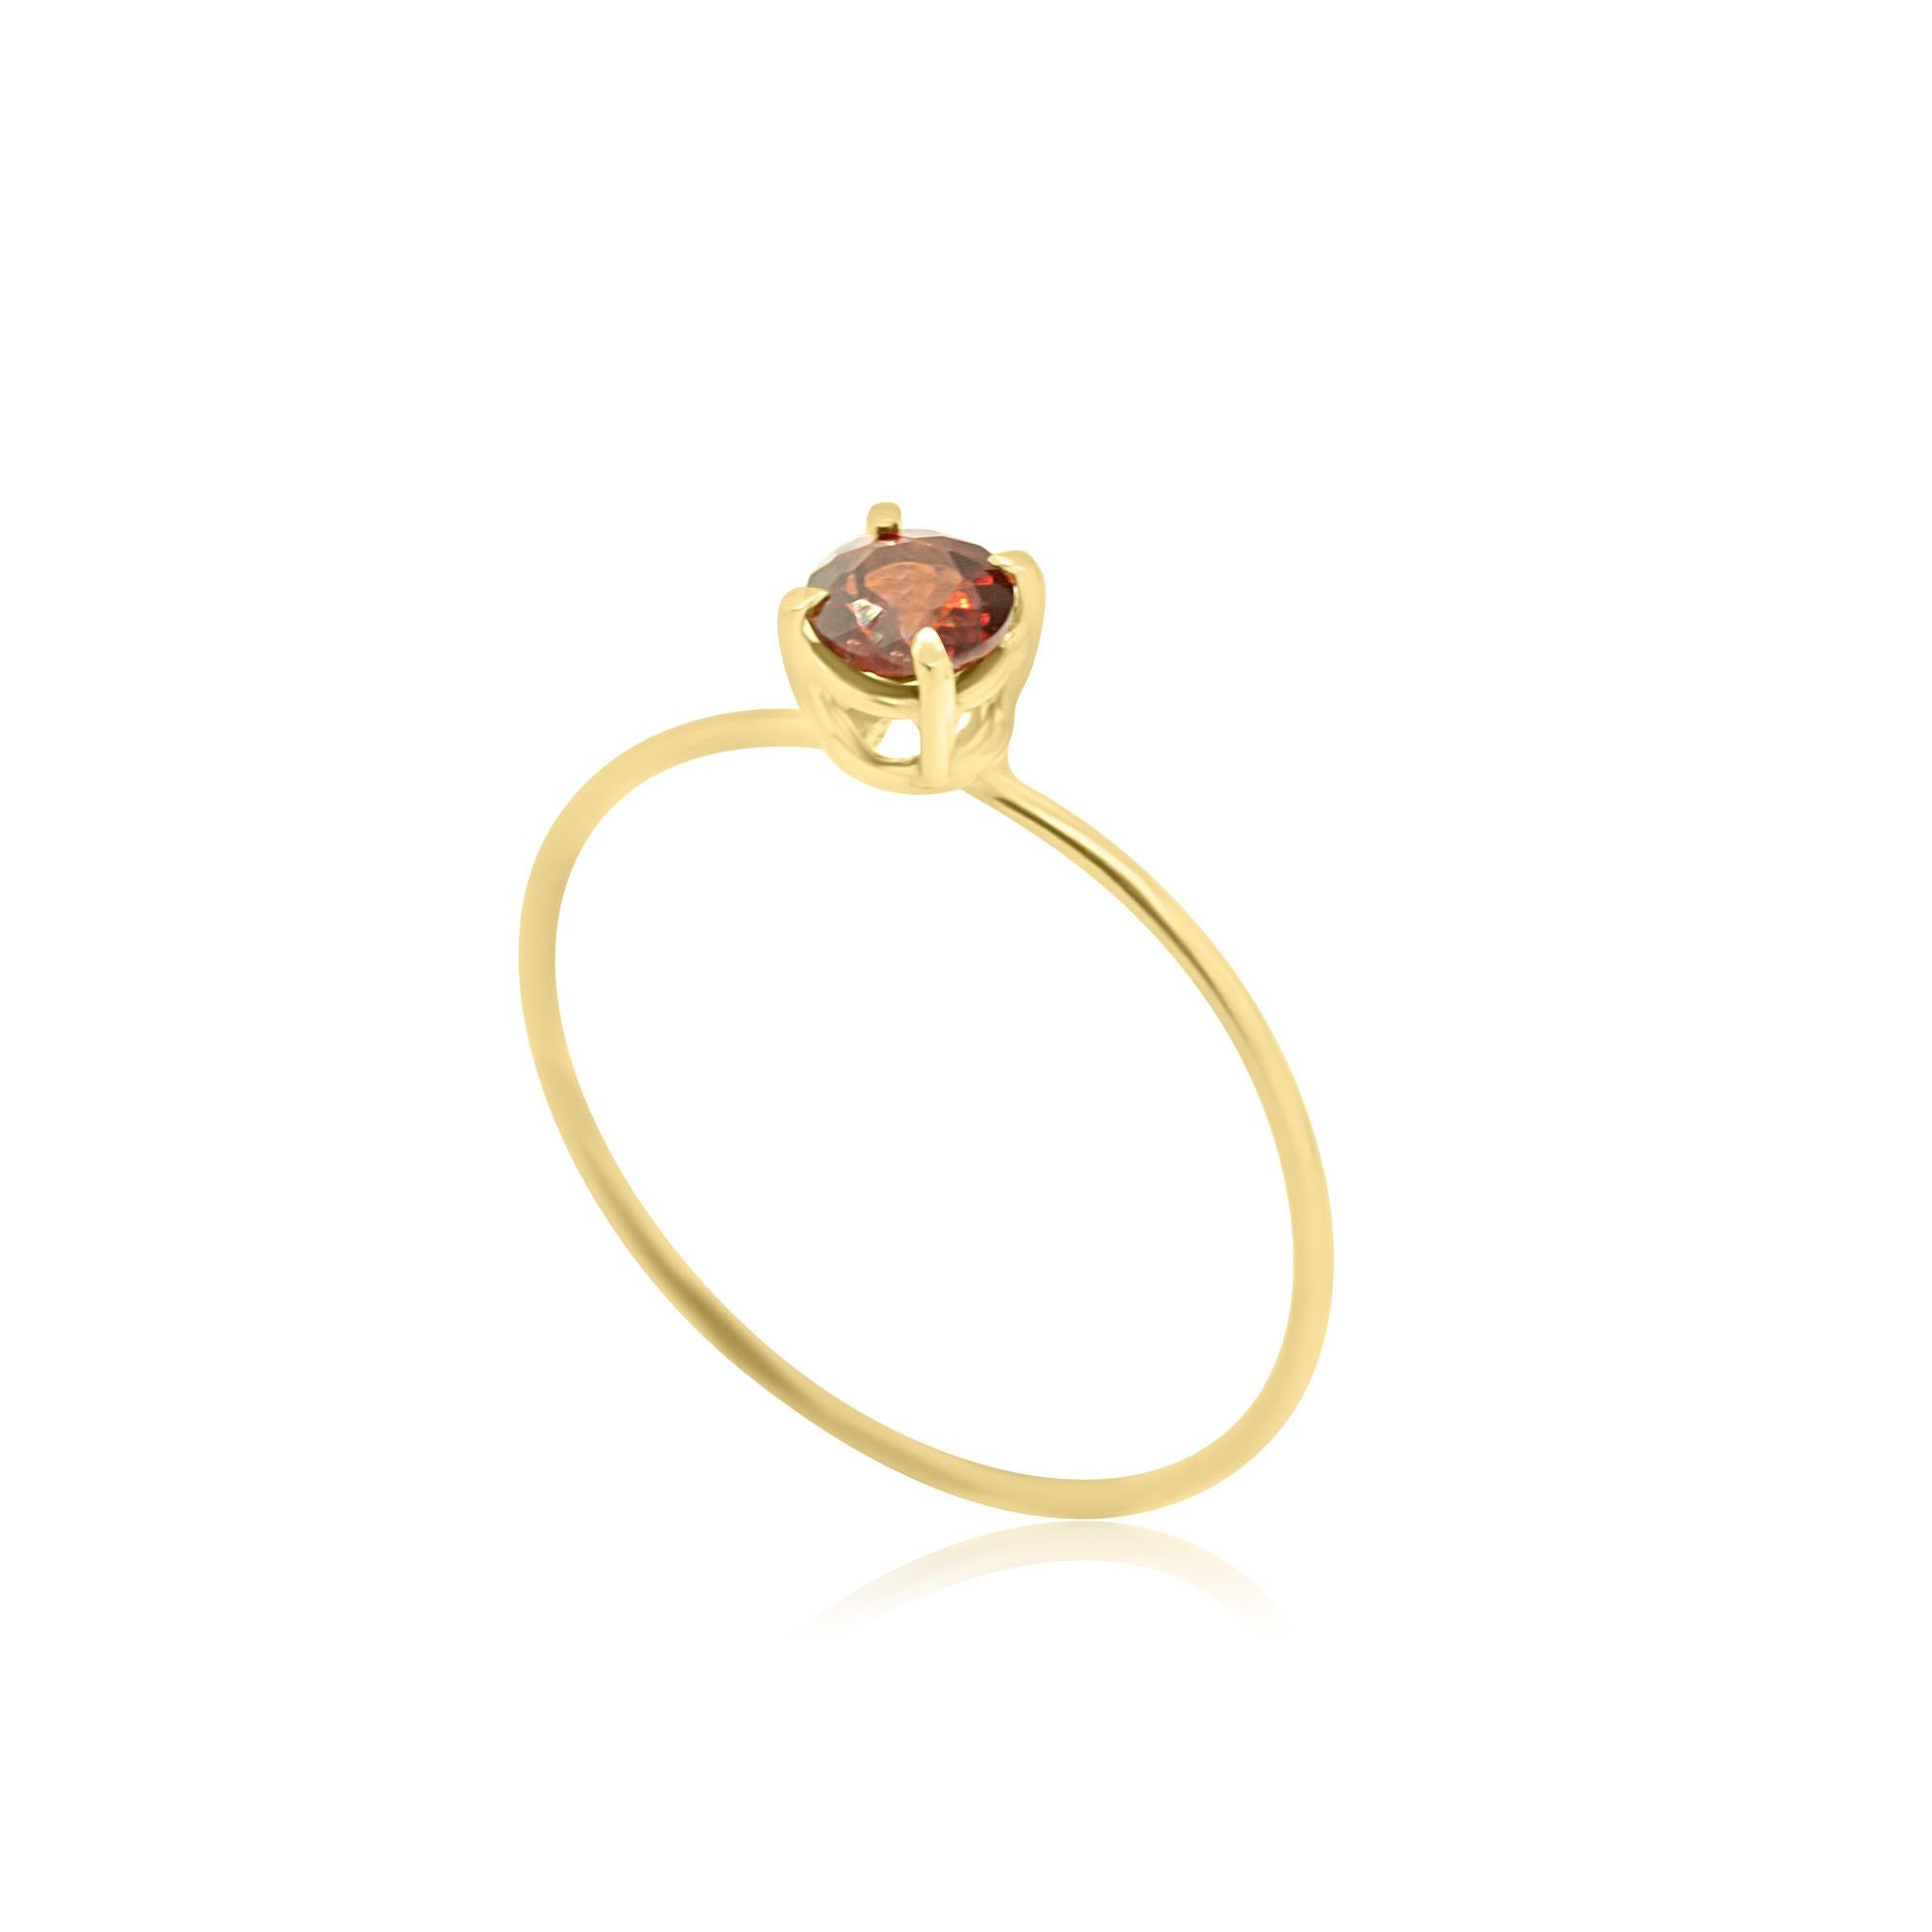 Stunning and magnificent Garnet ring in yellow gold. This epic jewellery piece is an outstanding display of quality and Italian handmade royal craftsmanship. Create a fashionable look full of light and desire. This handmade ring will embellished any